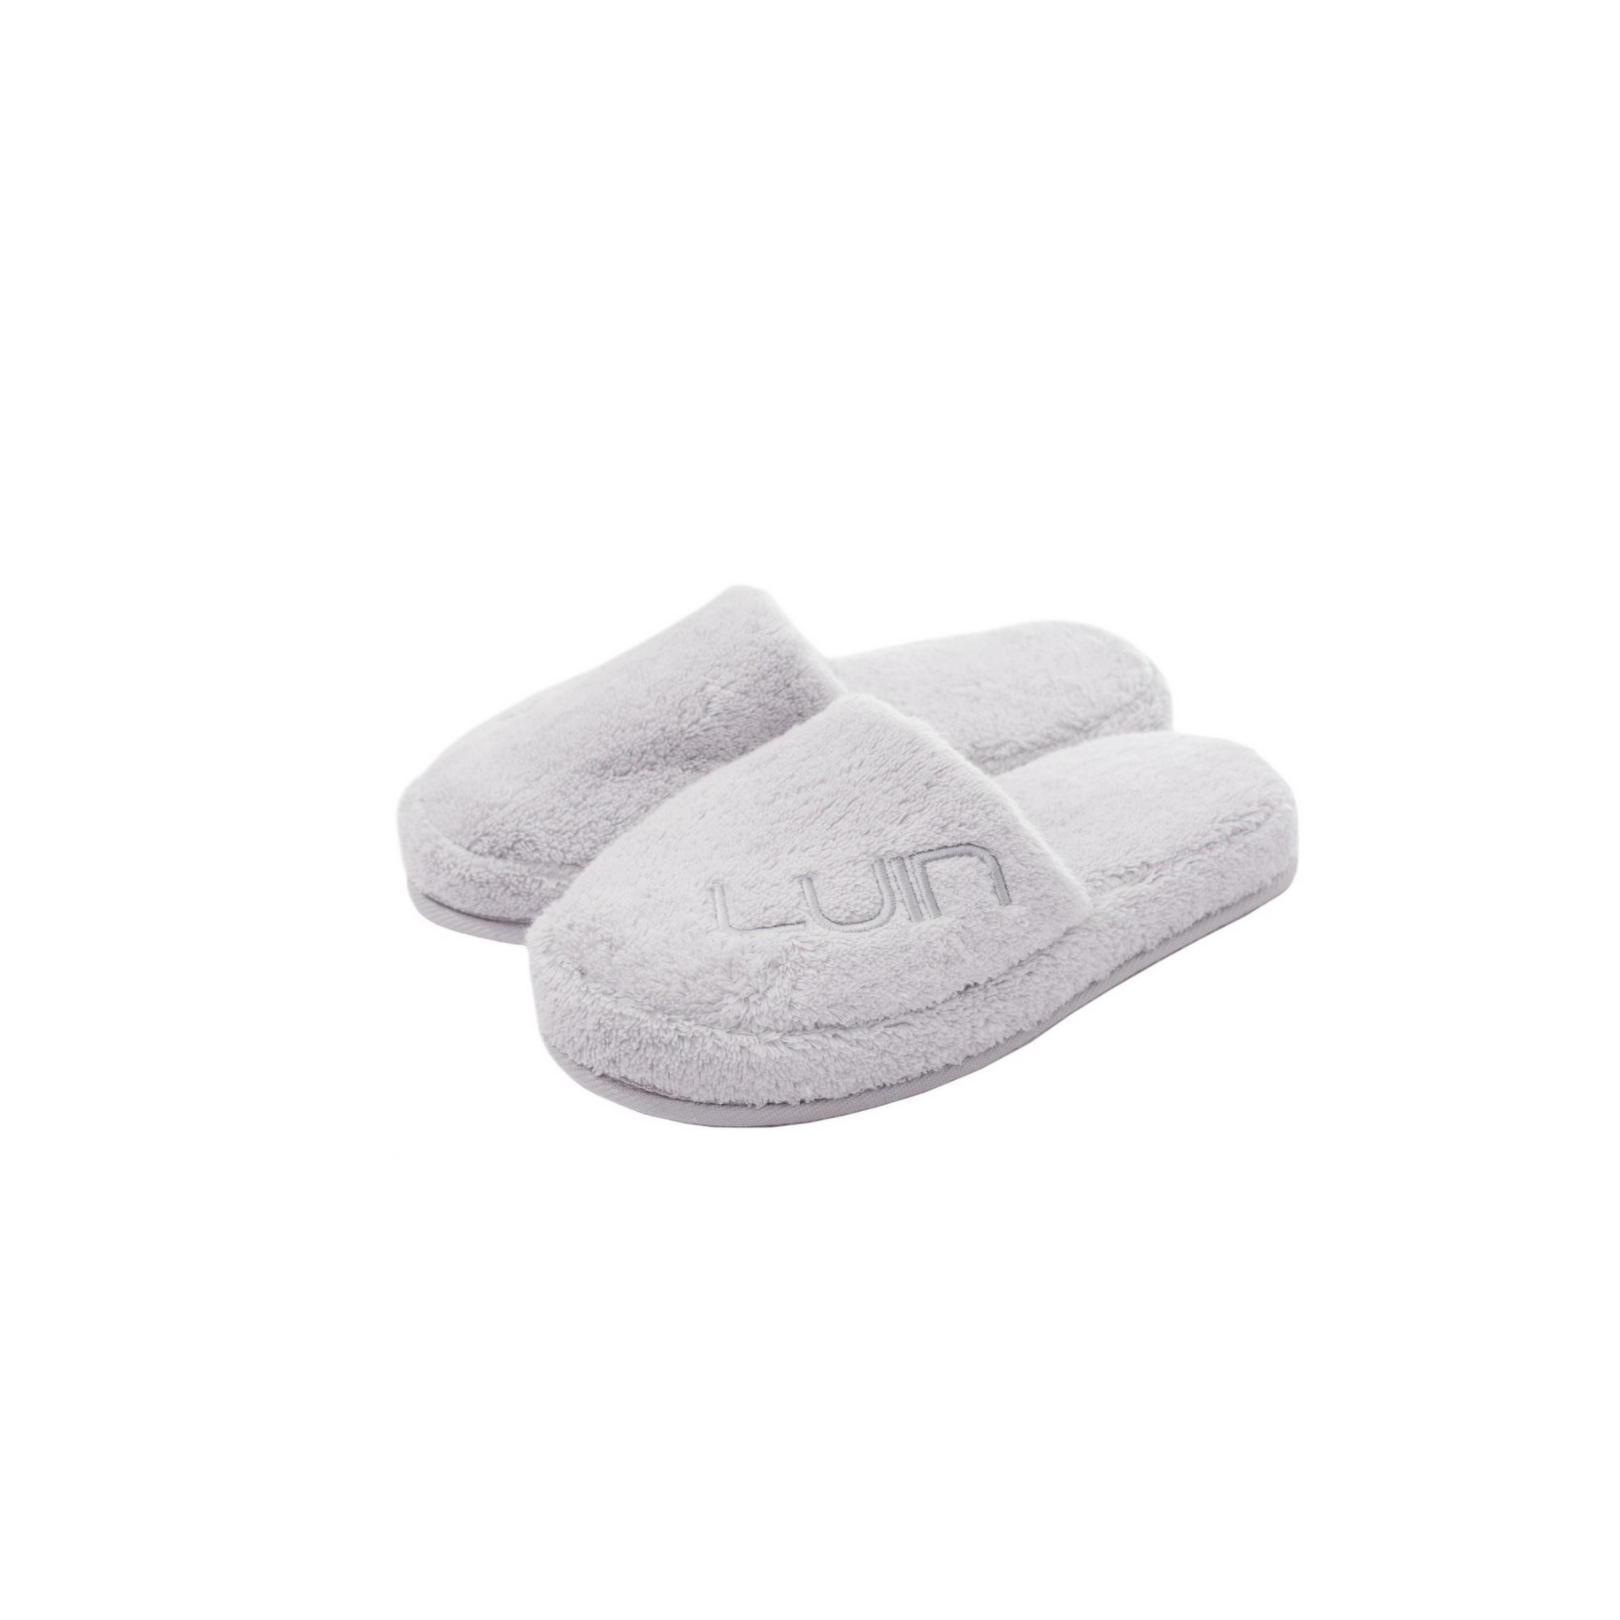 Cosy bath slippers S/M 37-40 pearl grey Luin Living Your Home Your Spa